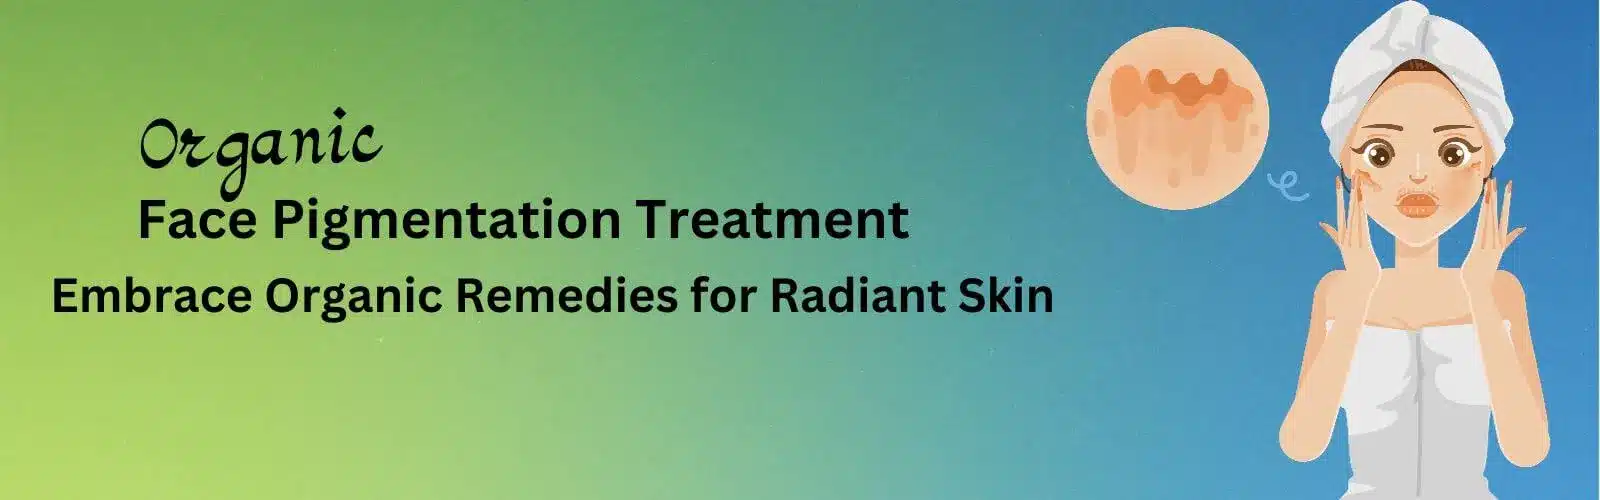 Face Pigmentation Treatment: Embrace Organic Remedies for Radiant Skin